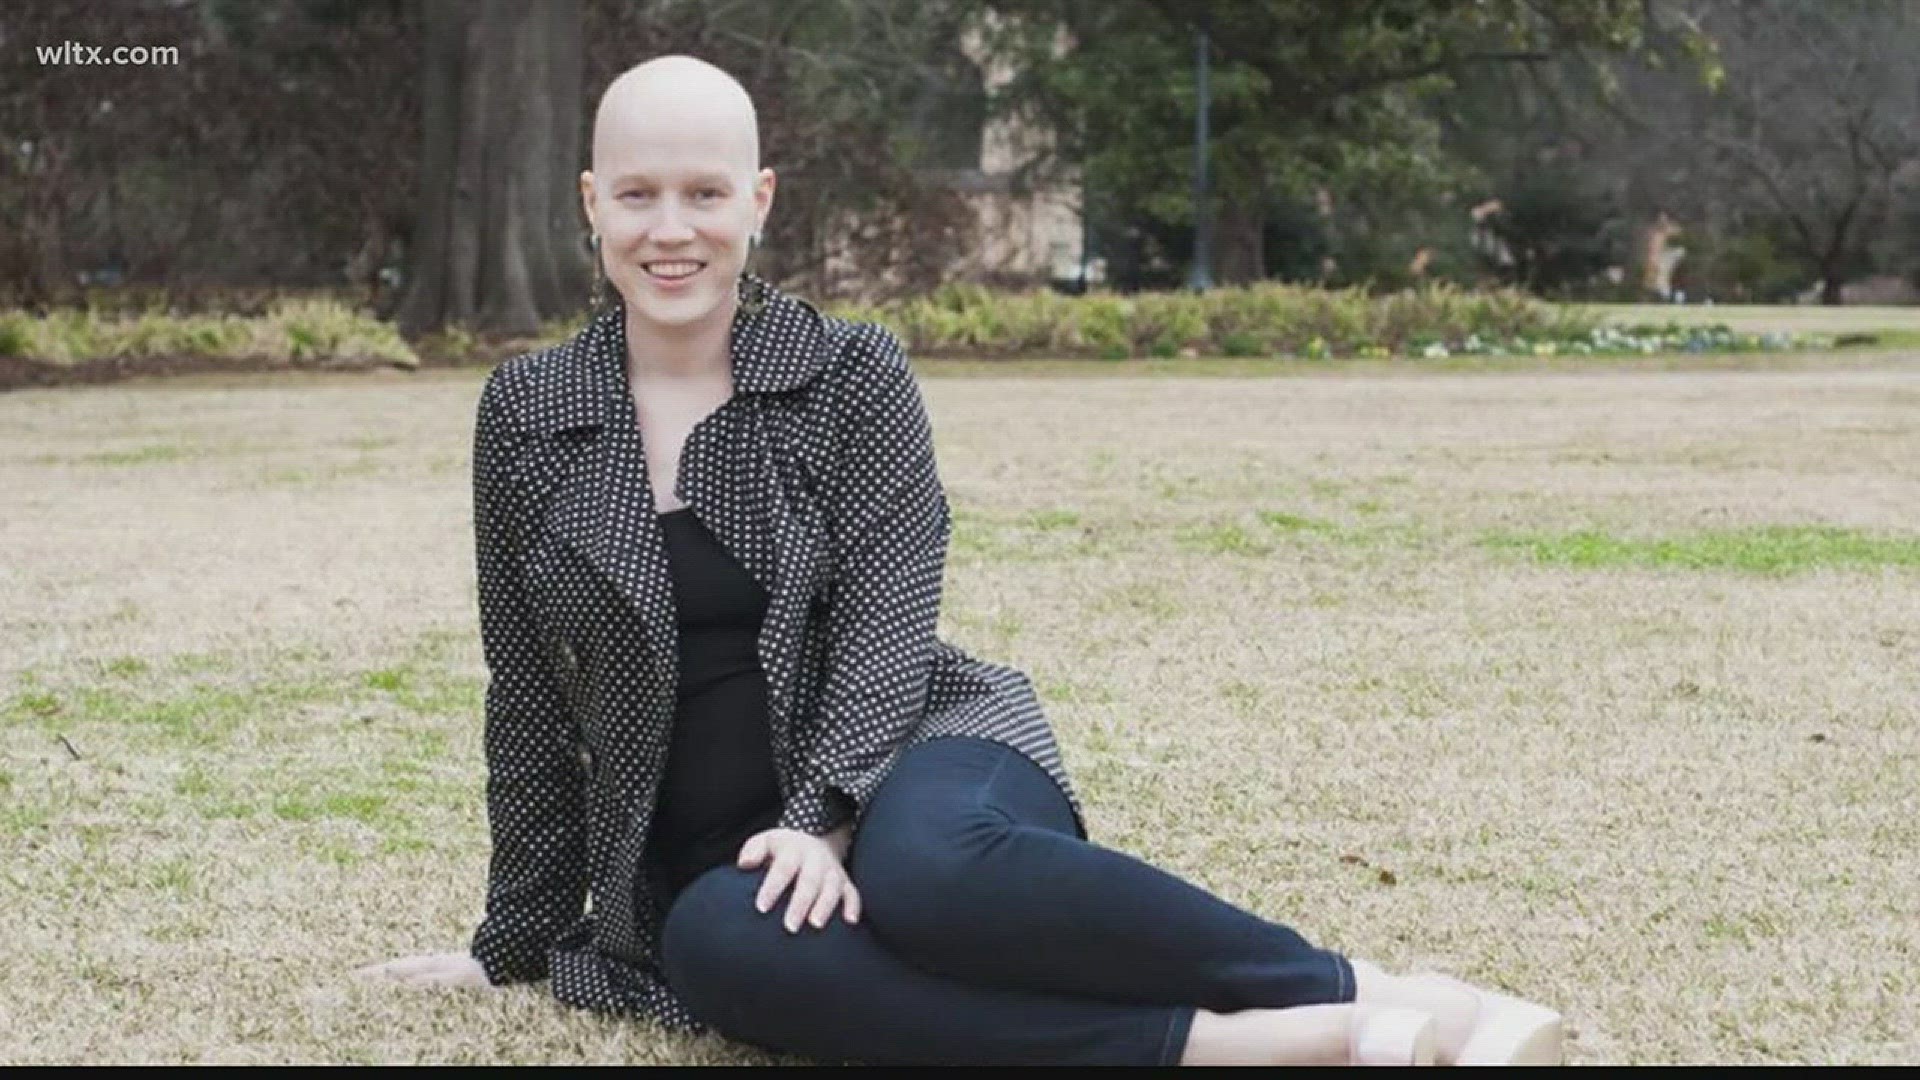 Laurin Long was diagnosed with breast cancer when she was only 26 years old.  The last three years have been filled with ups and downs, but this Saturday she will marry her fiance Mike.